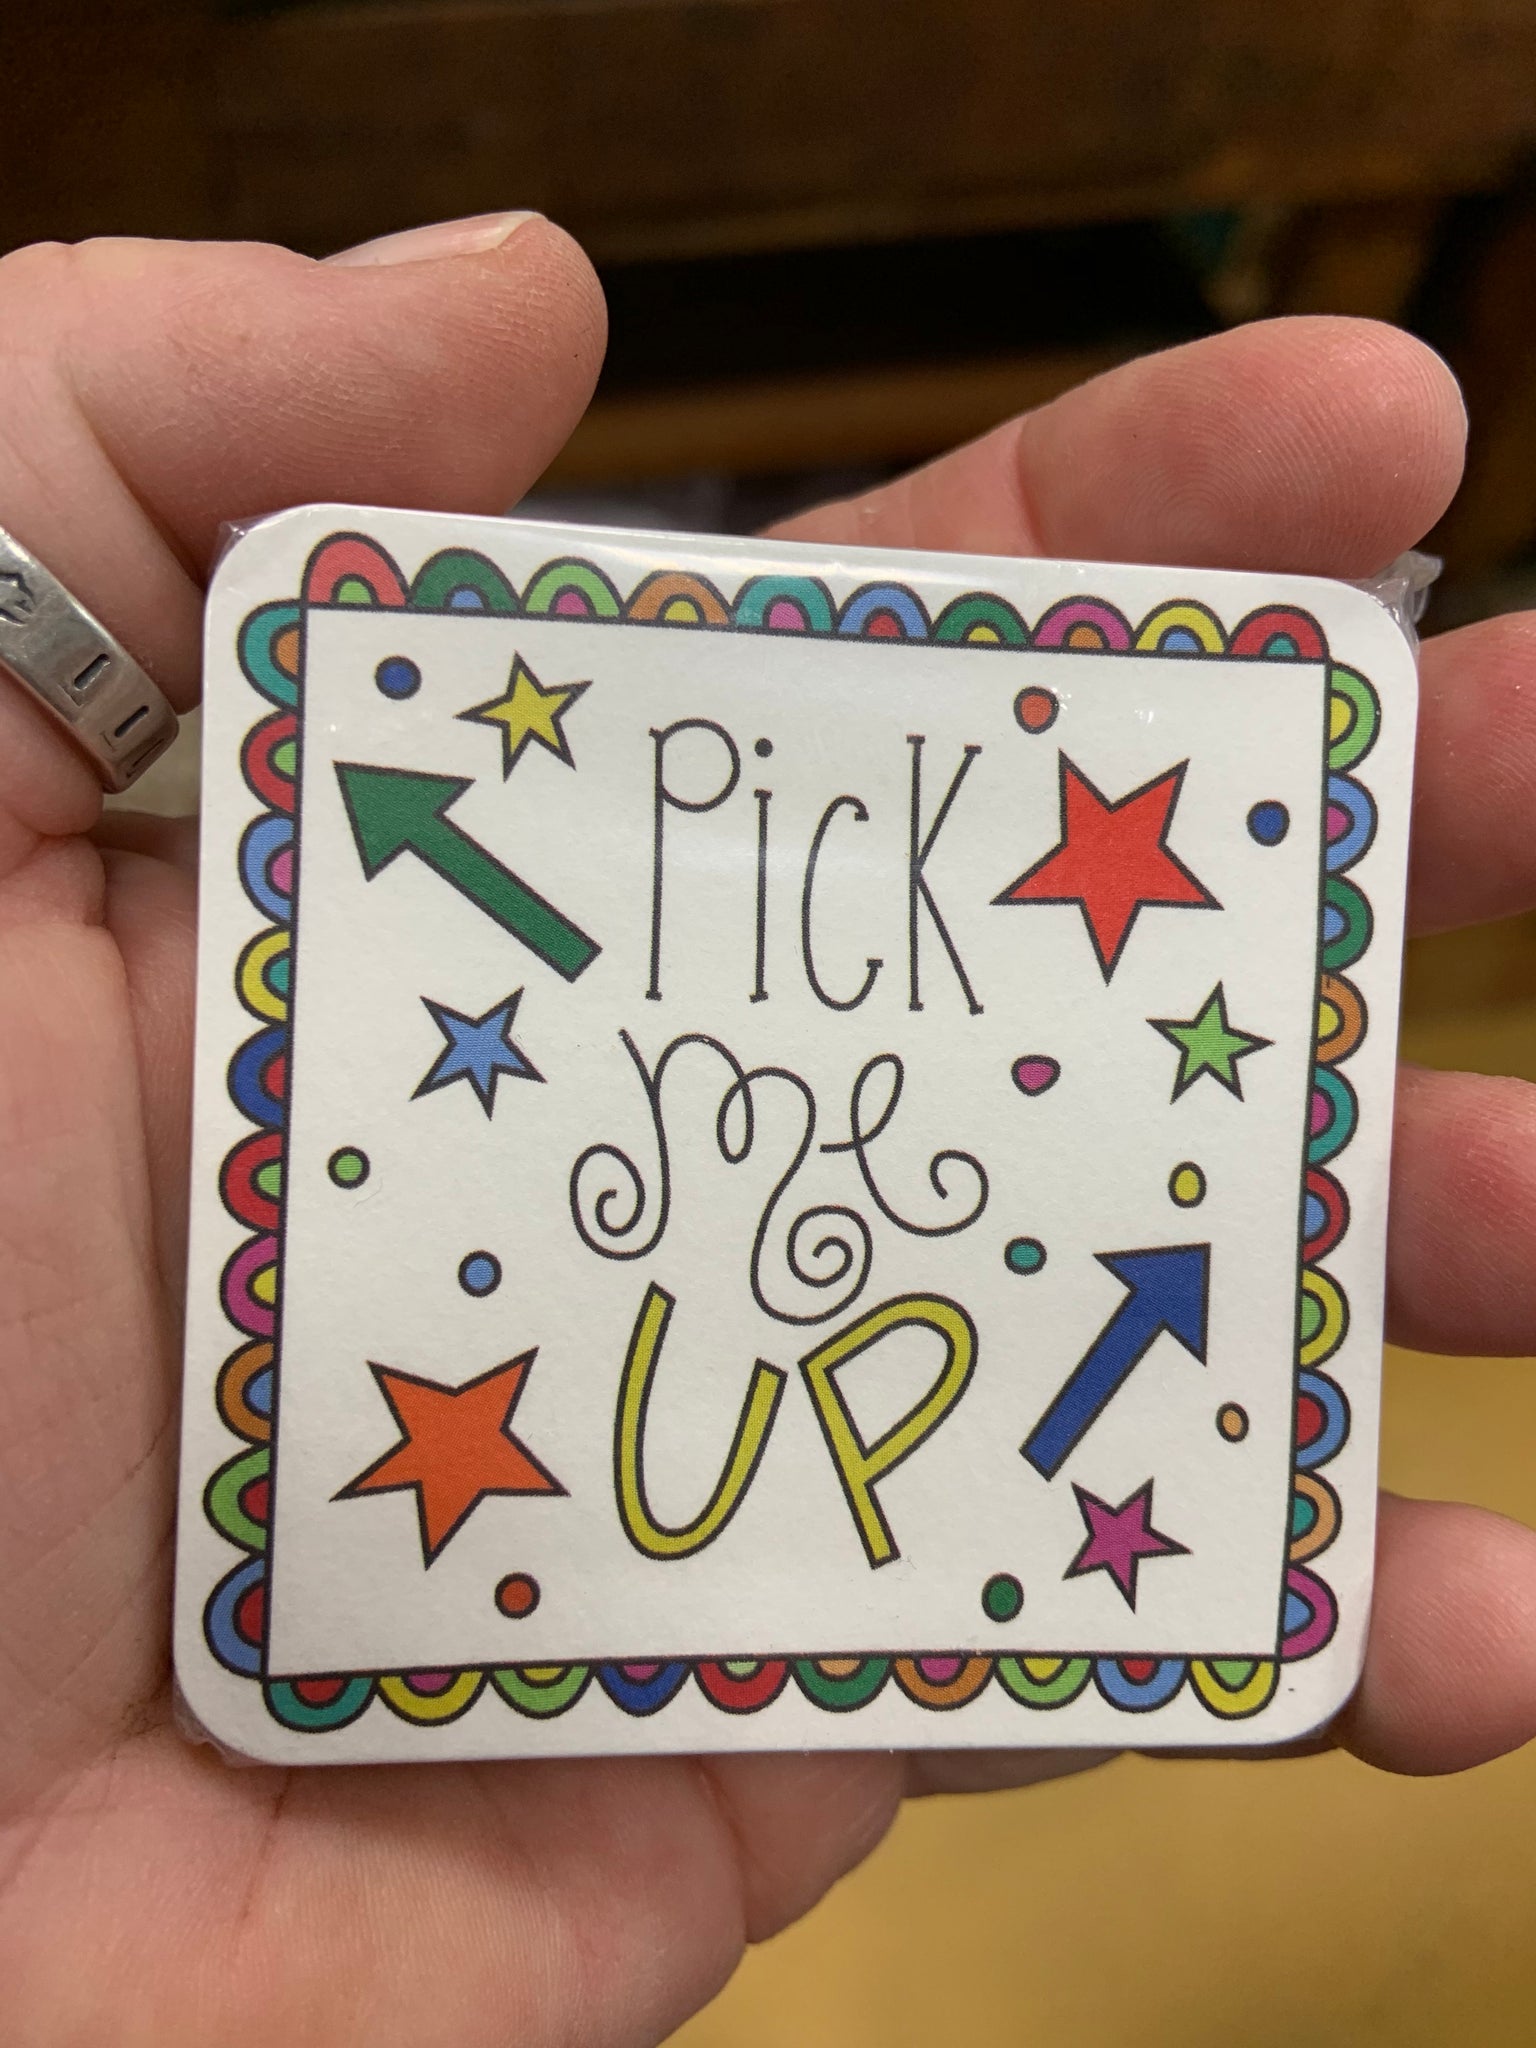 Pick me up cards